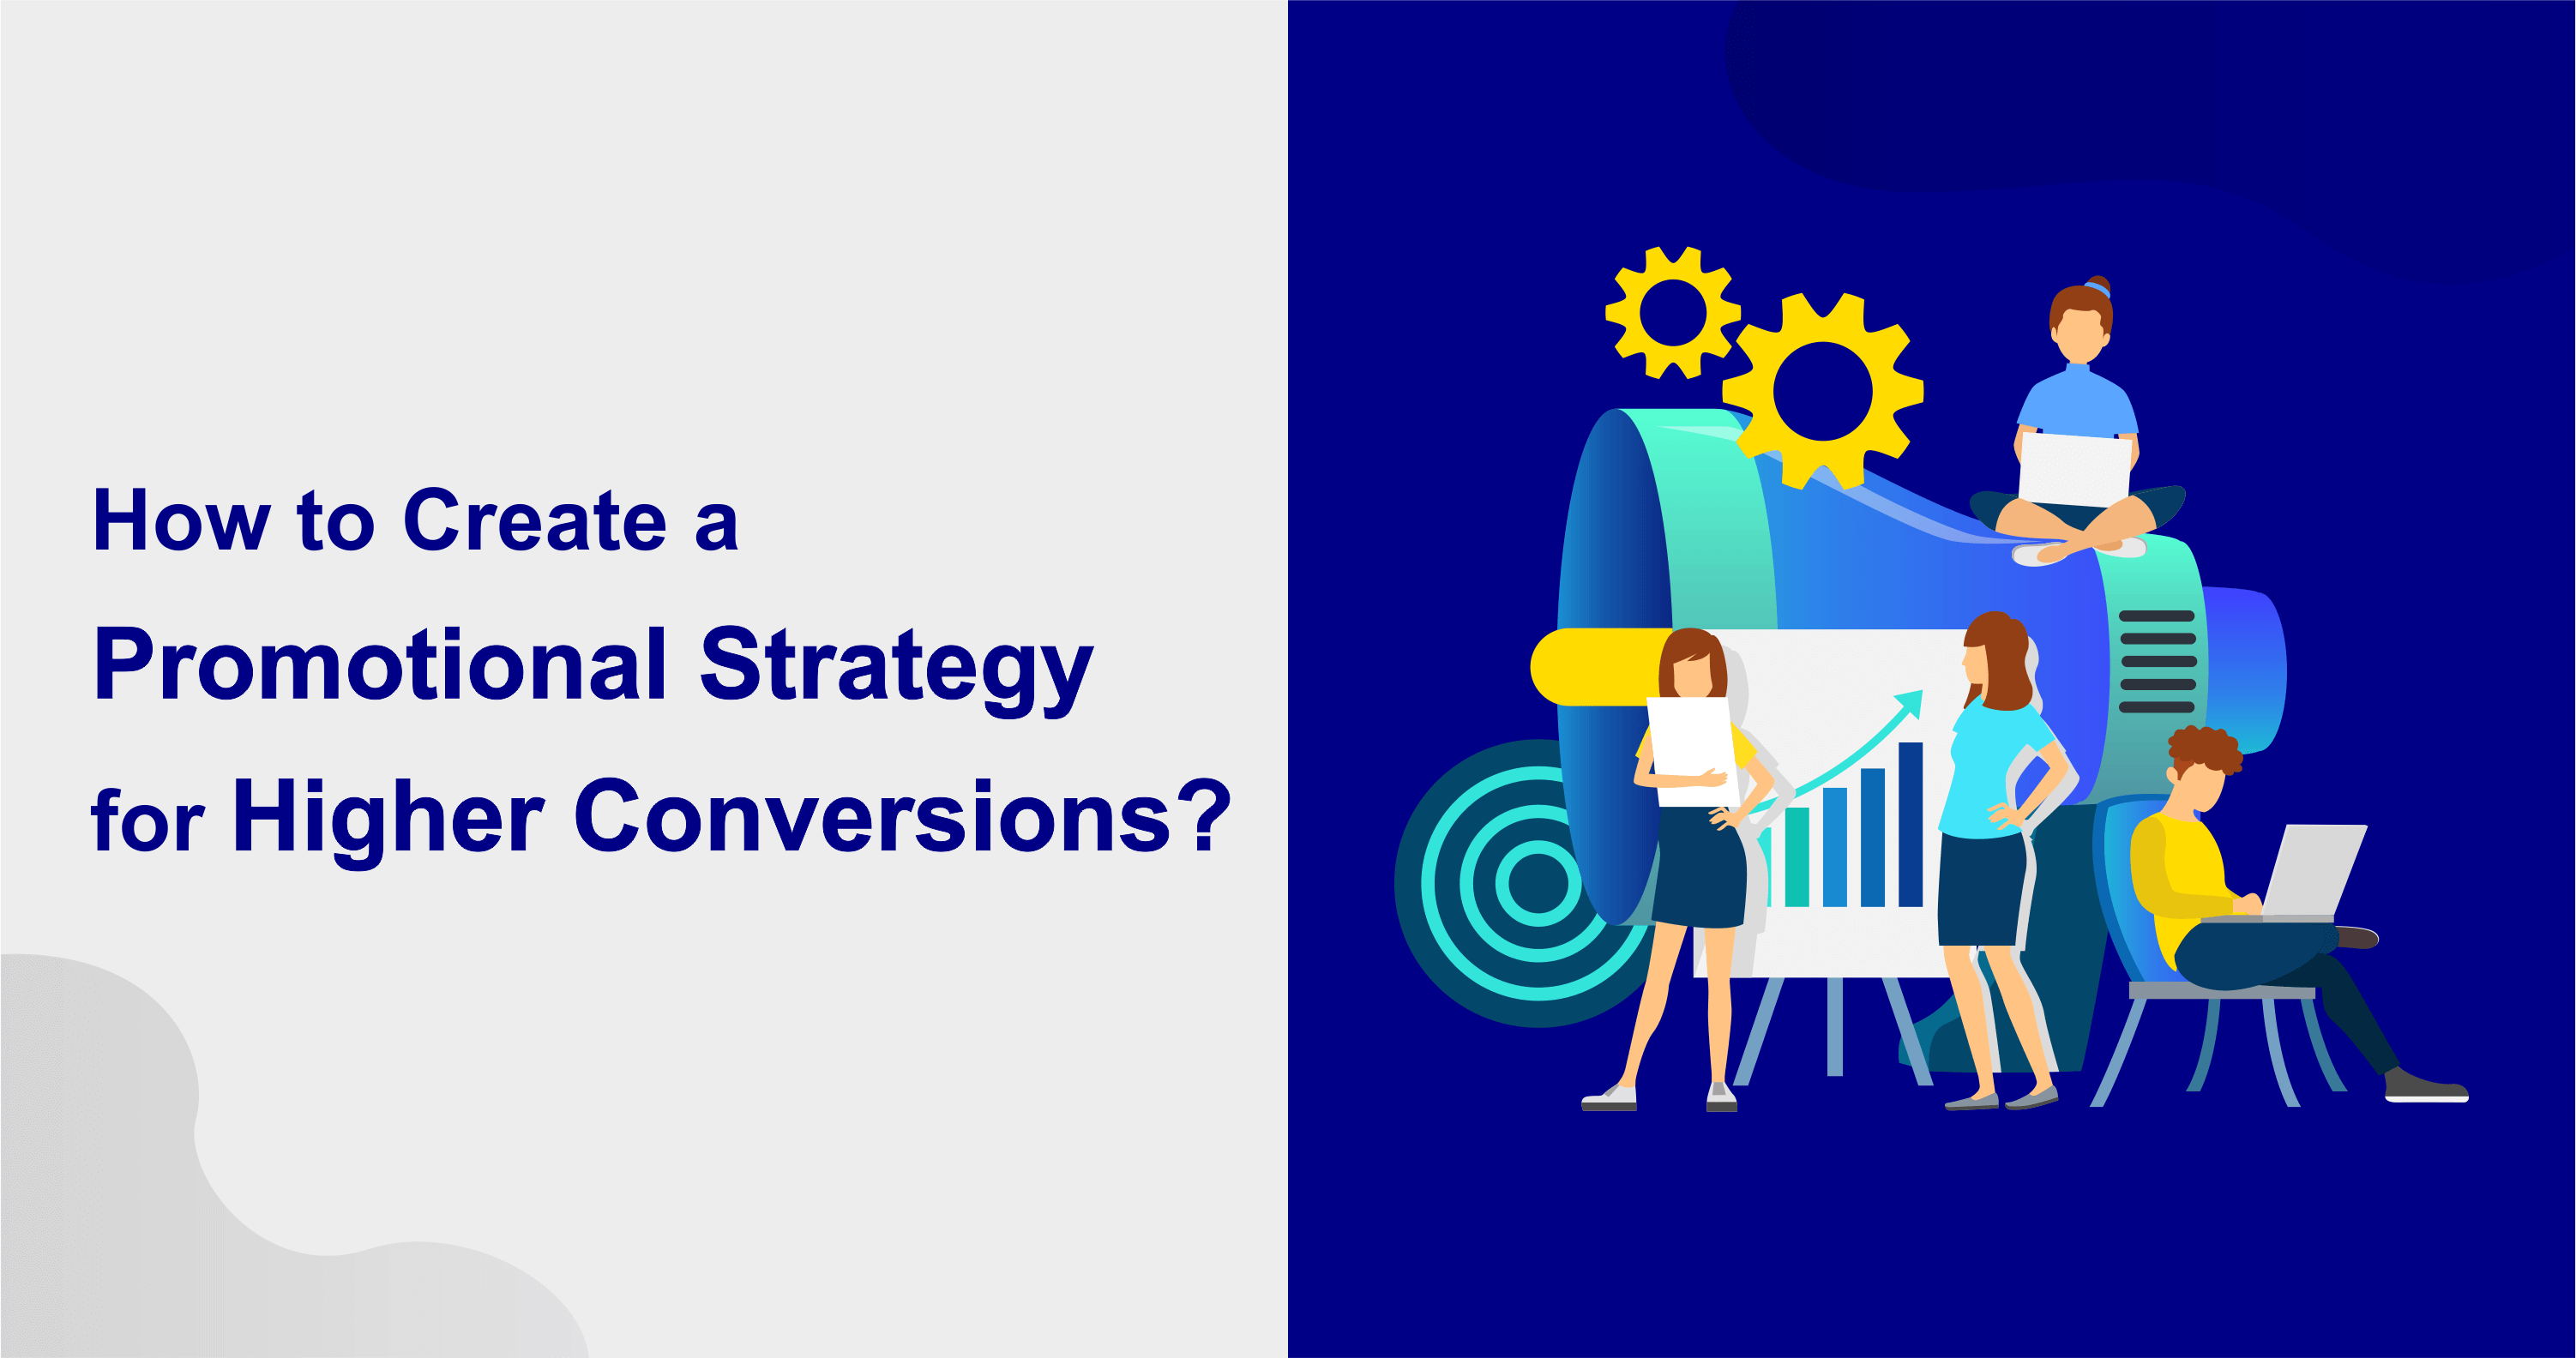 How to Create a Promotional Strategy for Higher Conversions